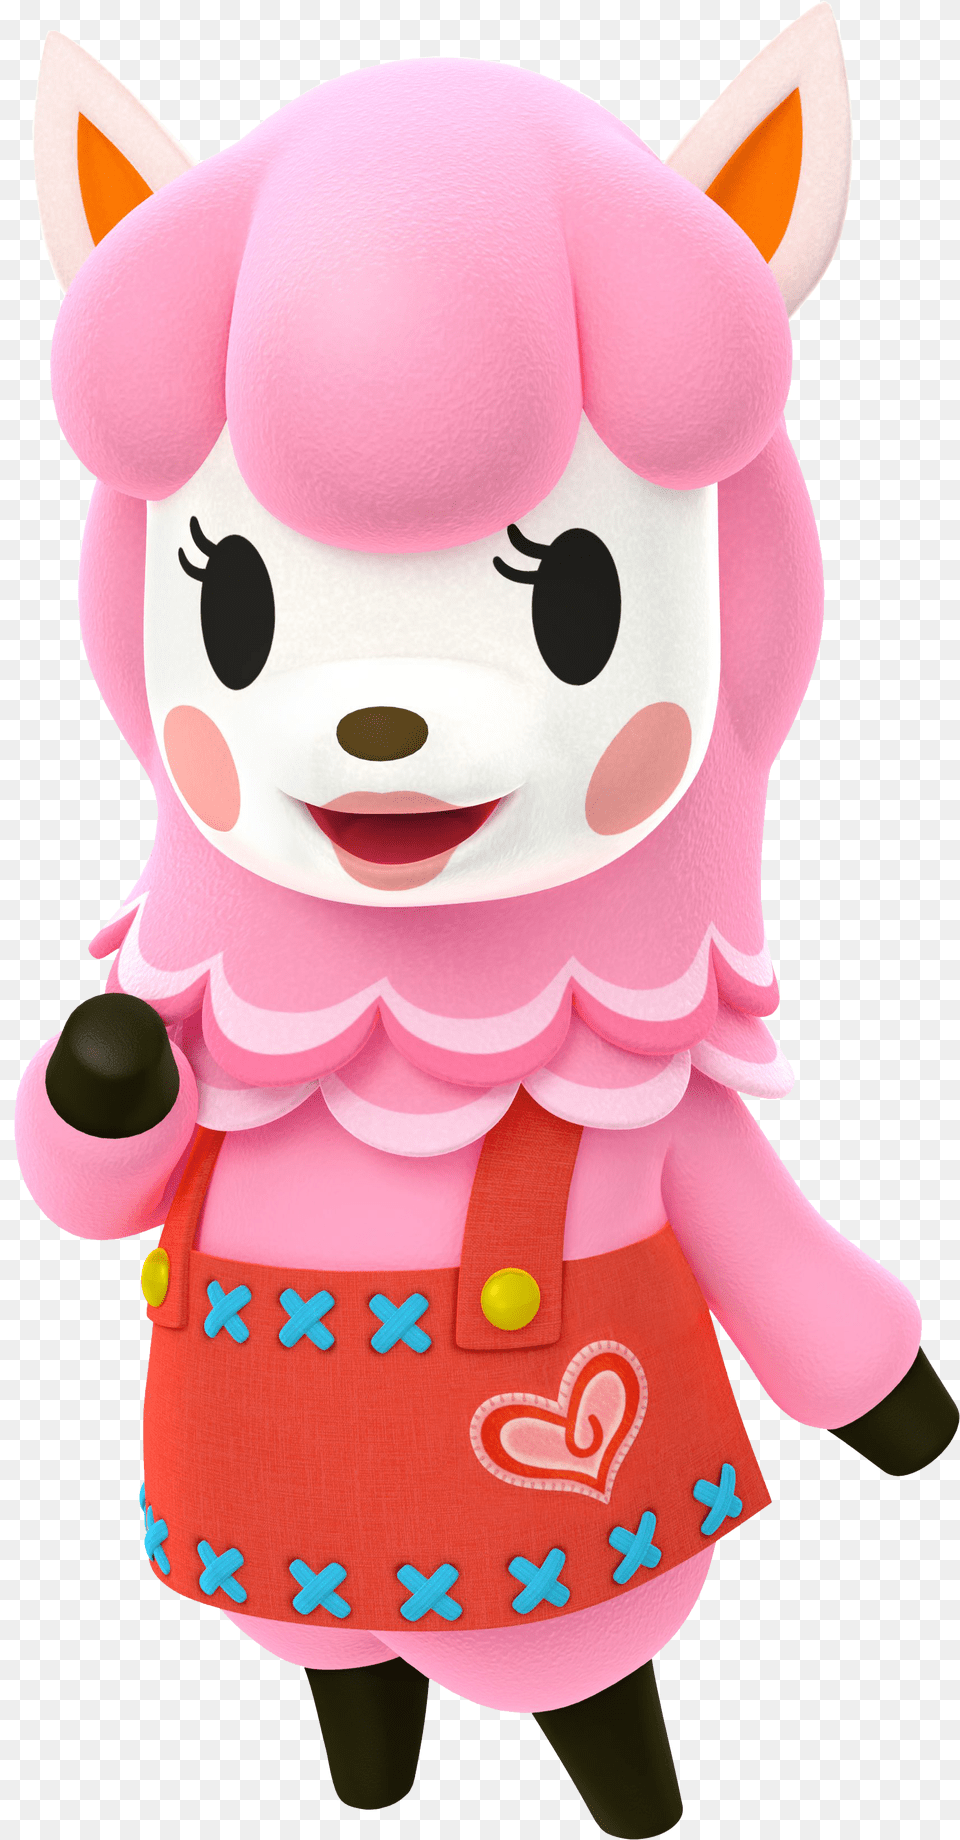 Animal Crossing Reese Animal Crossing Characters, Plush, Toy, Bag, Doll Png Image